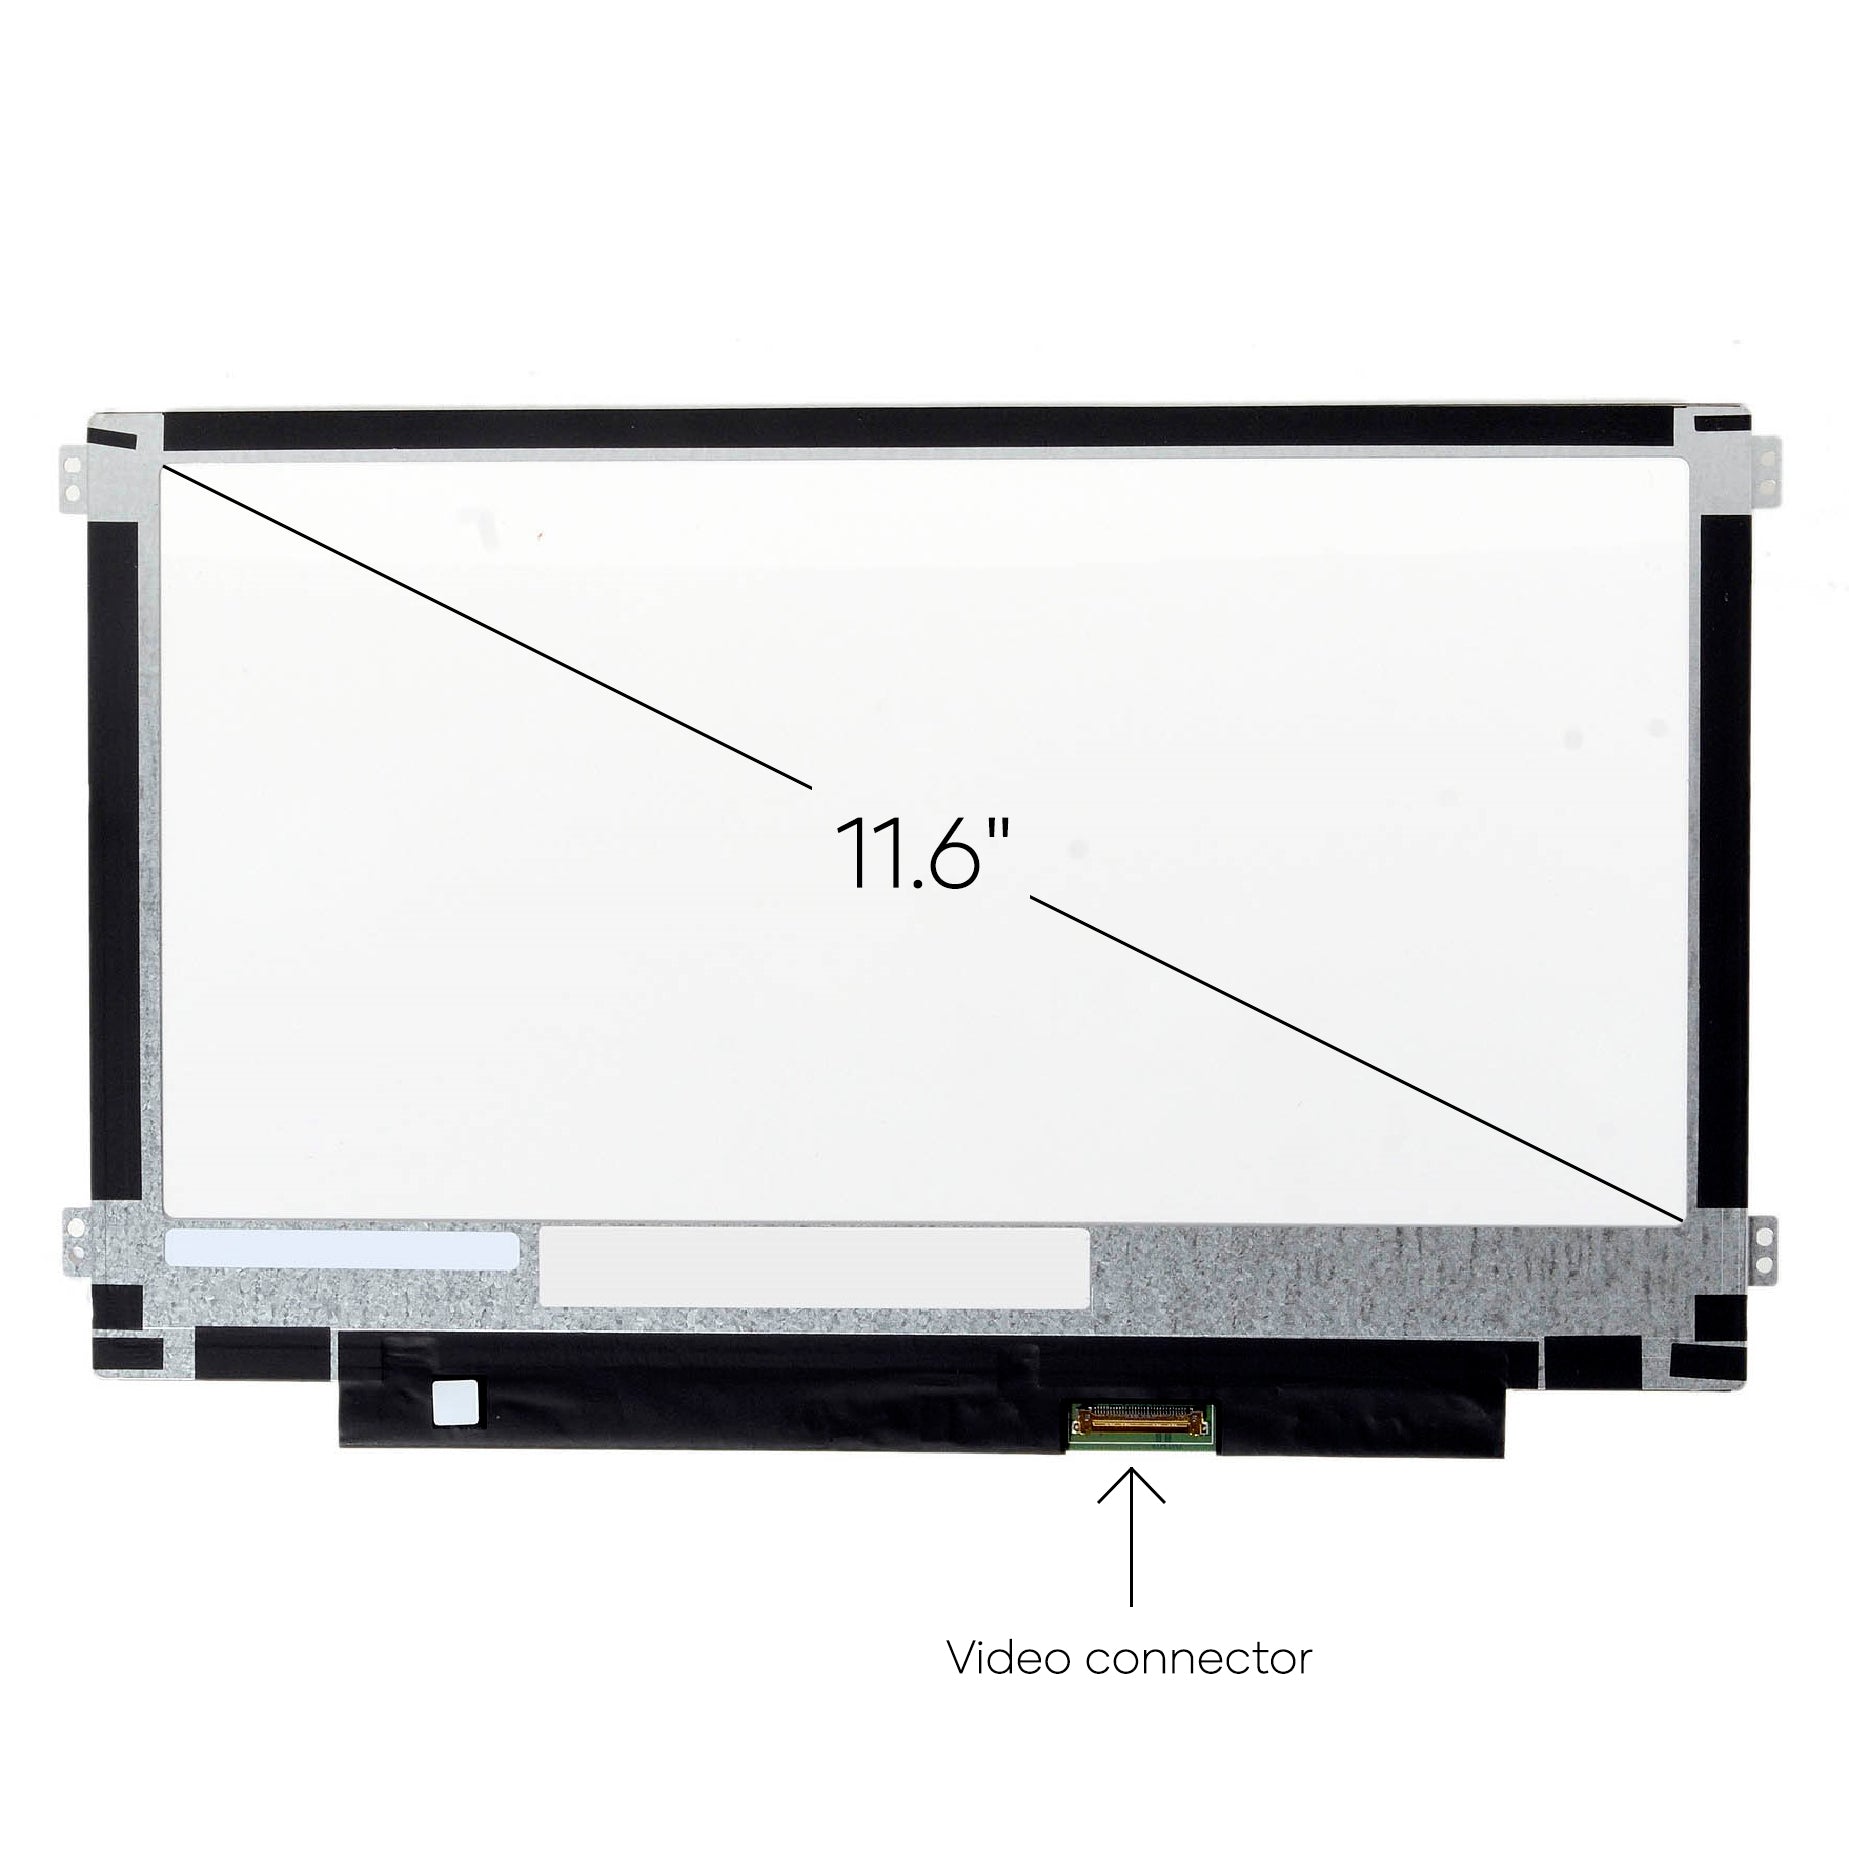 Screen Replacement for Acer Chromebook CB3-111-C670 HD 1366x768 Matte LCD LED Display